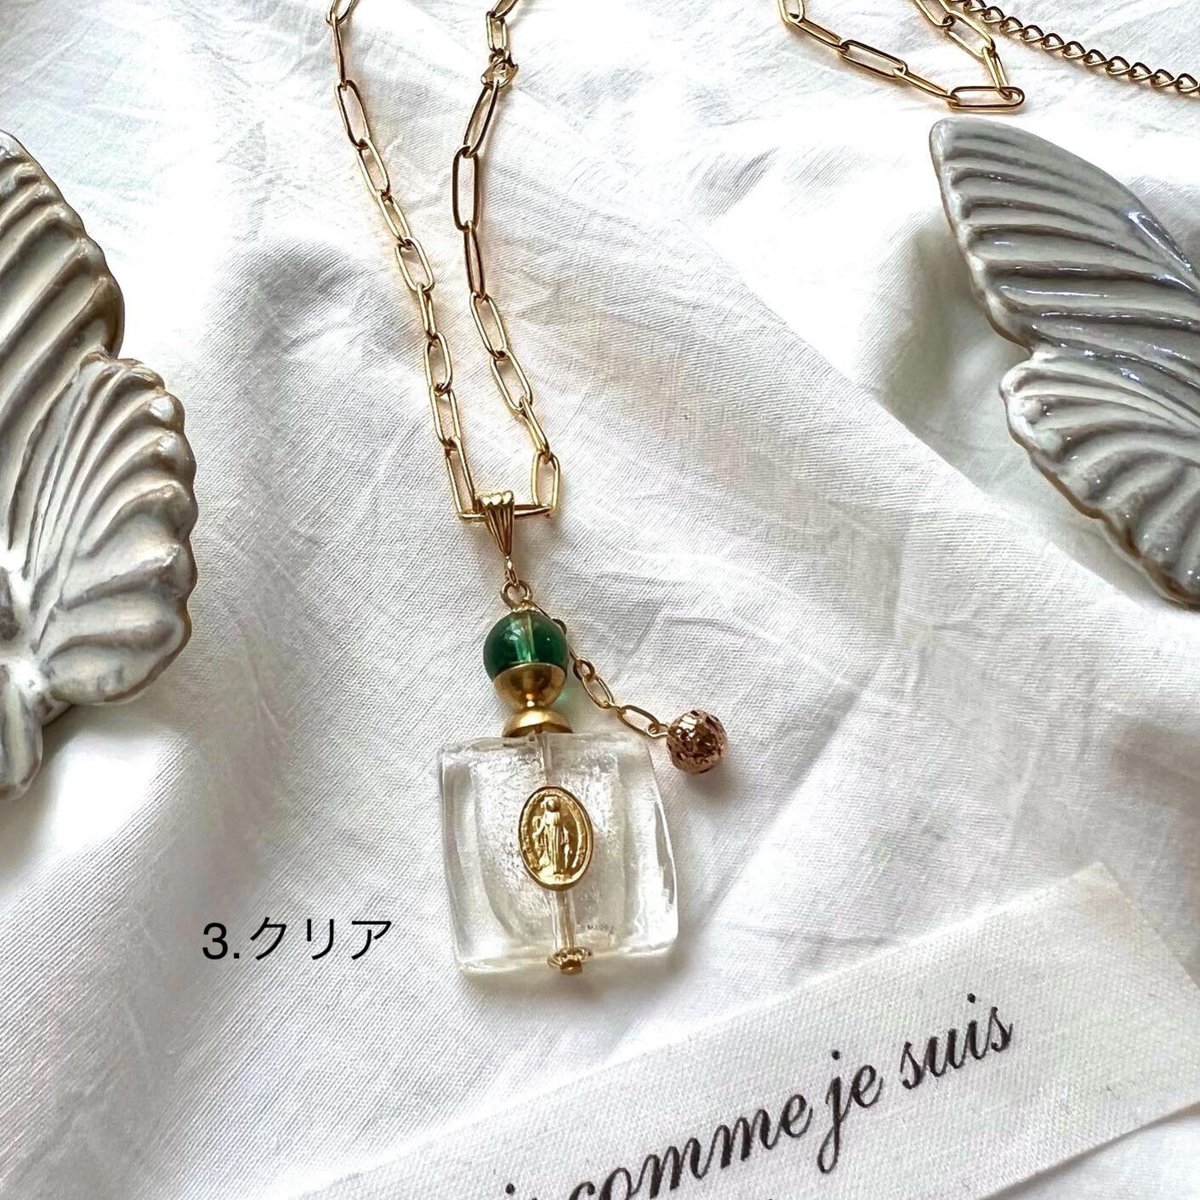 flacon de parfum amulette collier／お守り香水瓶のネックレス ...